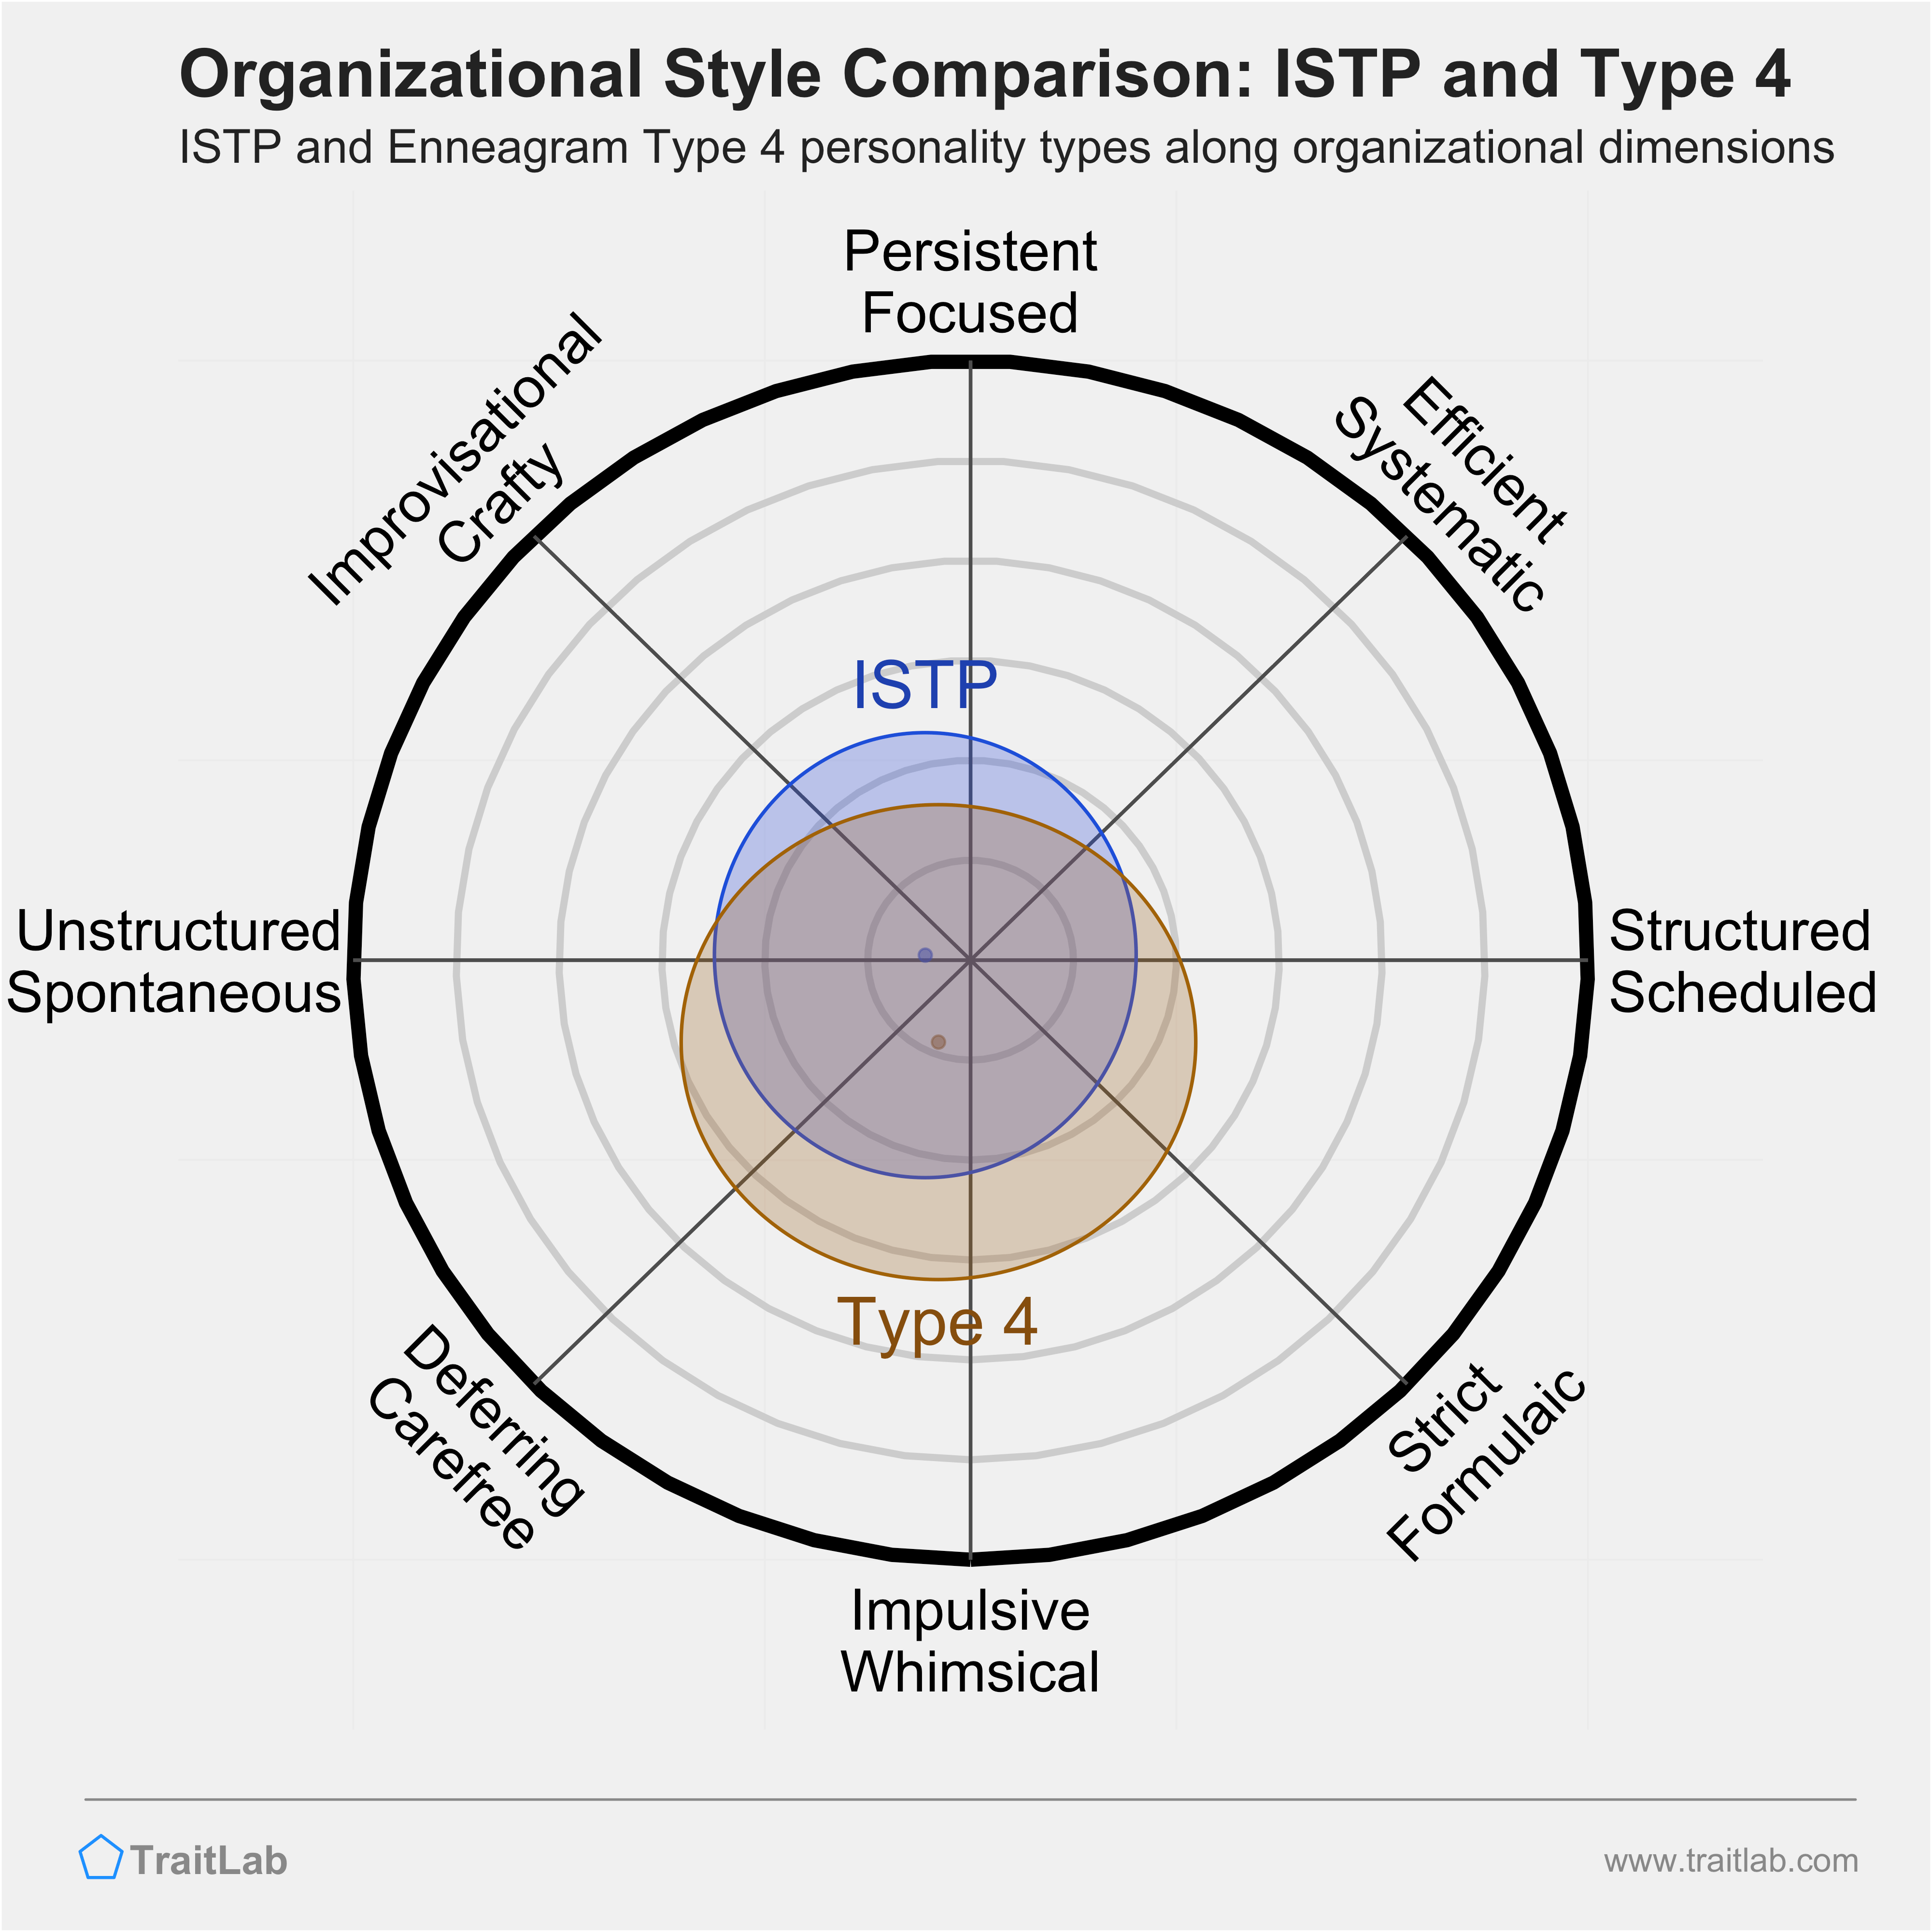 ISTP and Type 4 comparison across organizational dimensions